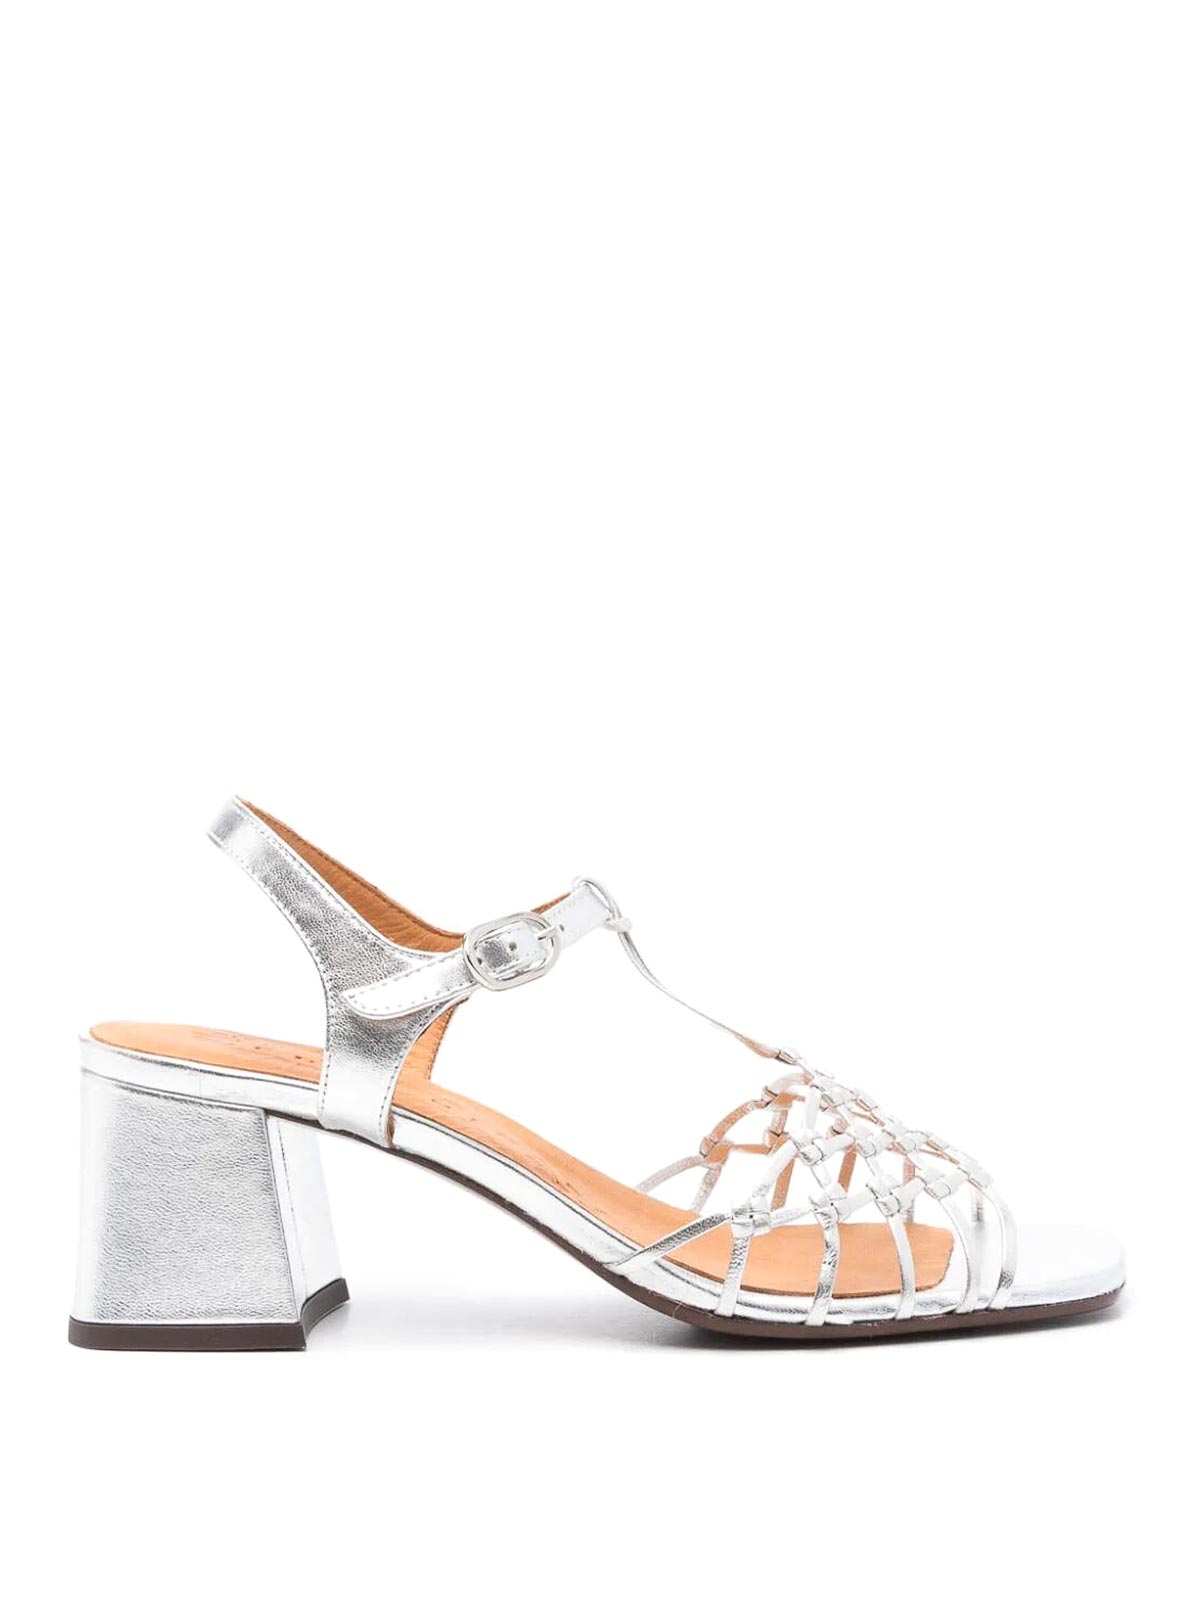 Shop Chie Mihara Silver Sandals